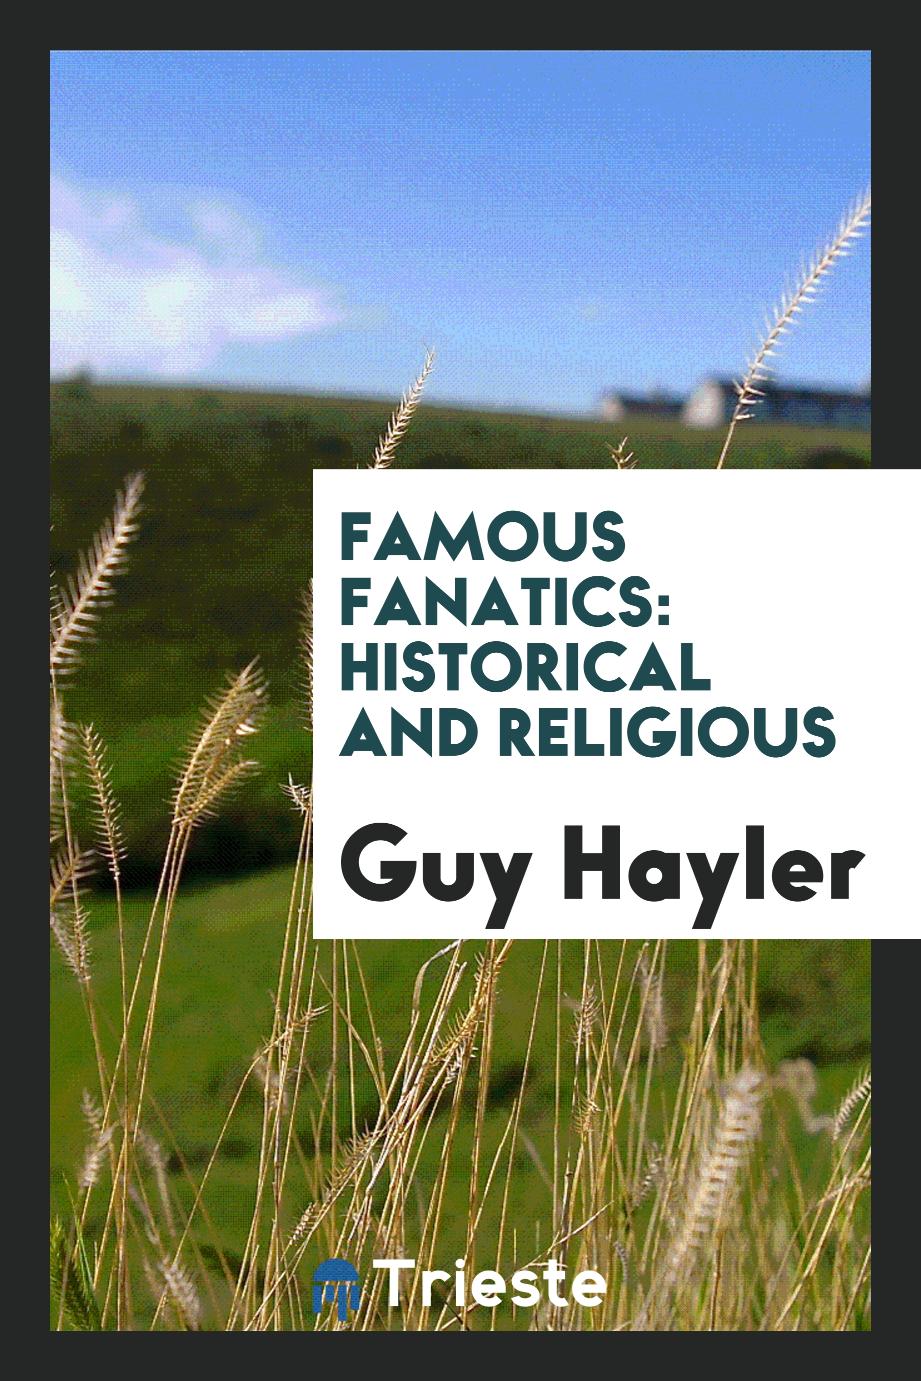 Famous fanatics: historical and religious